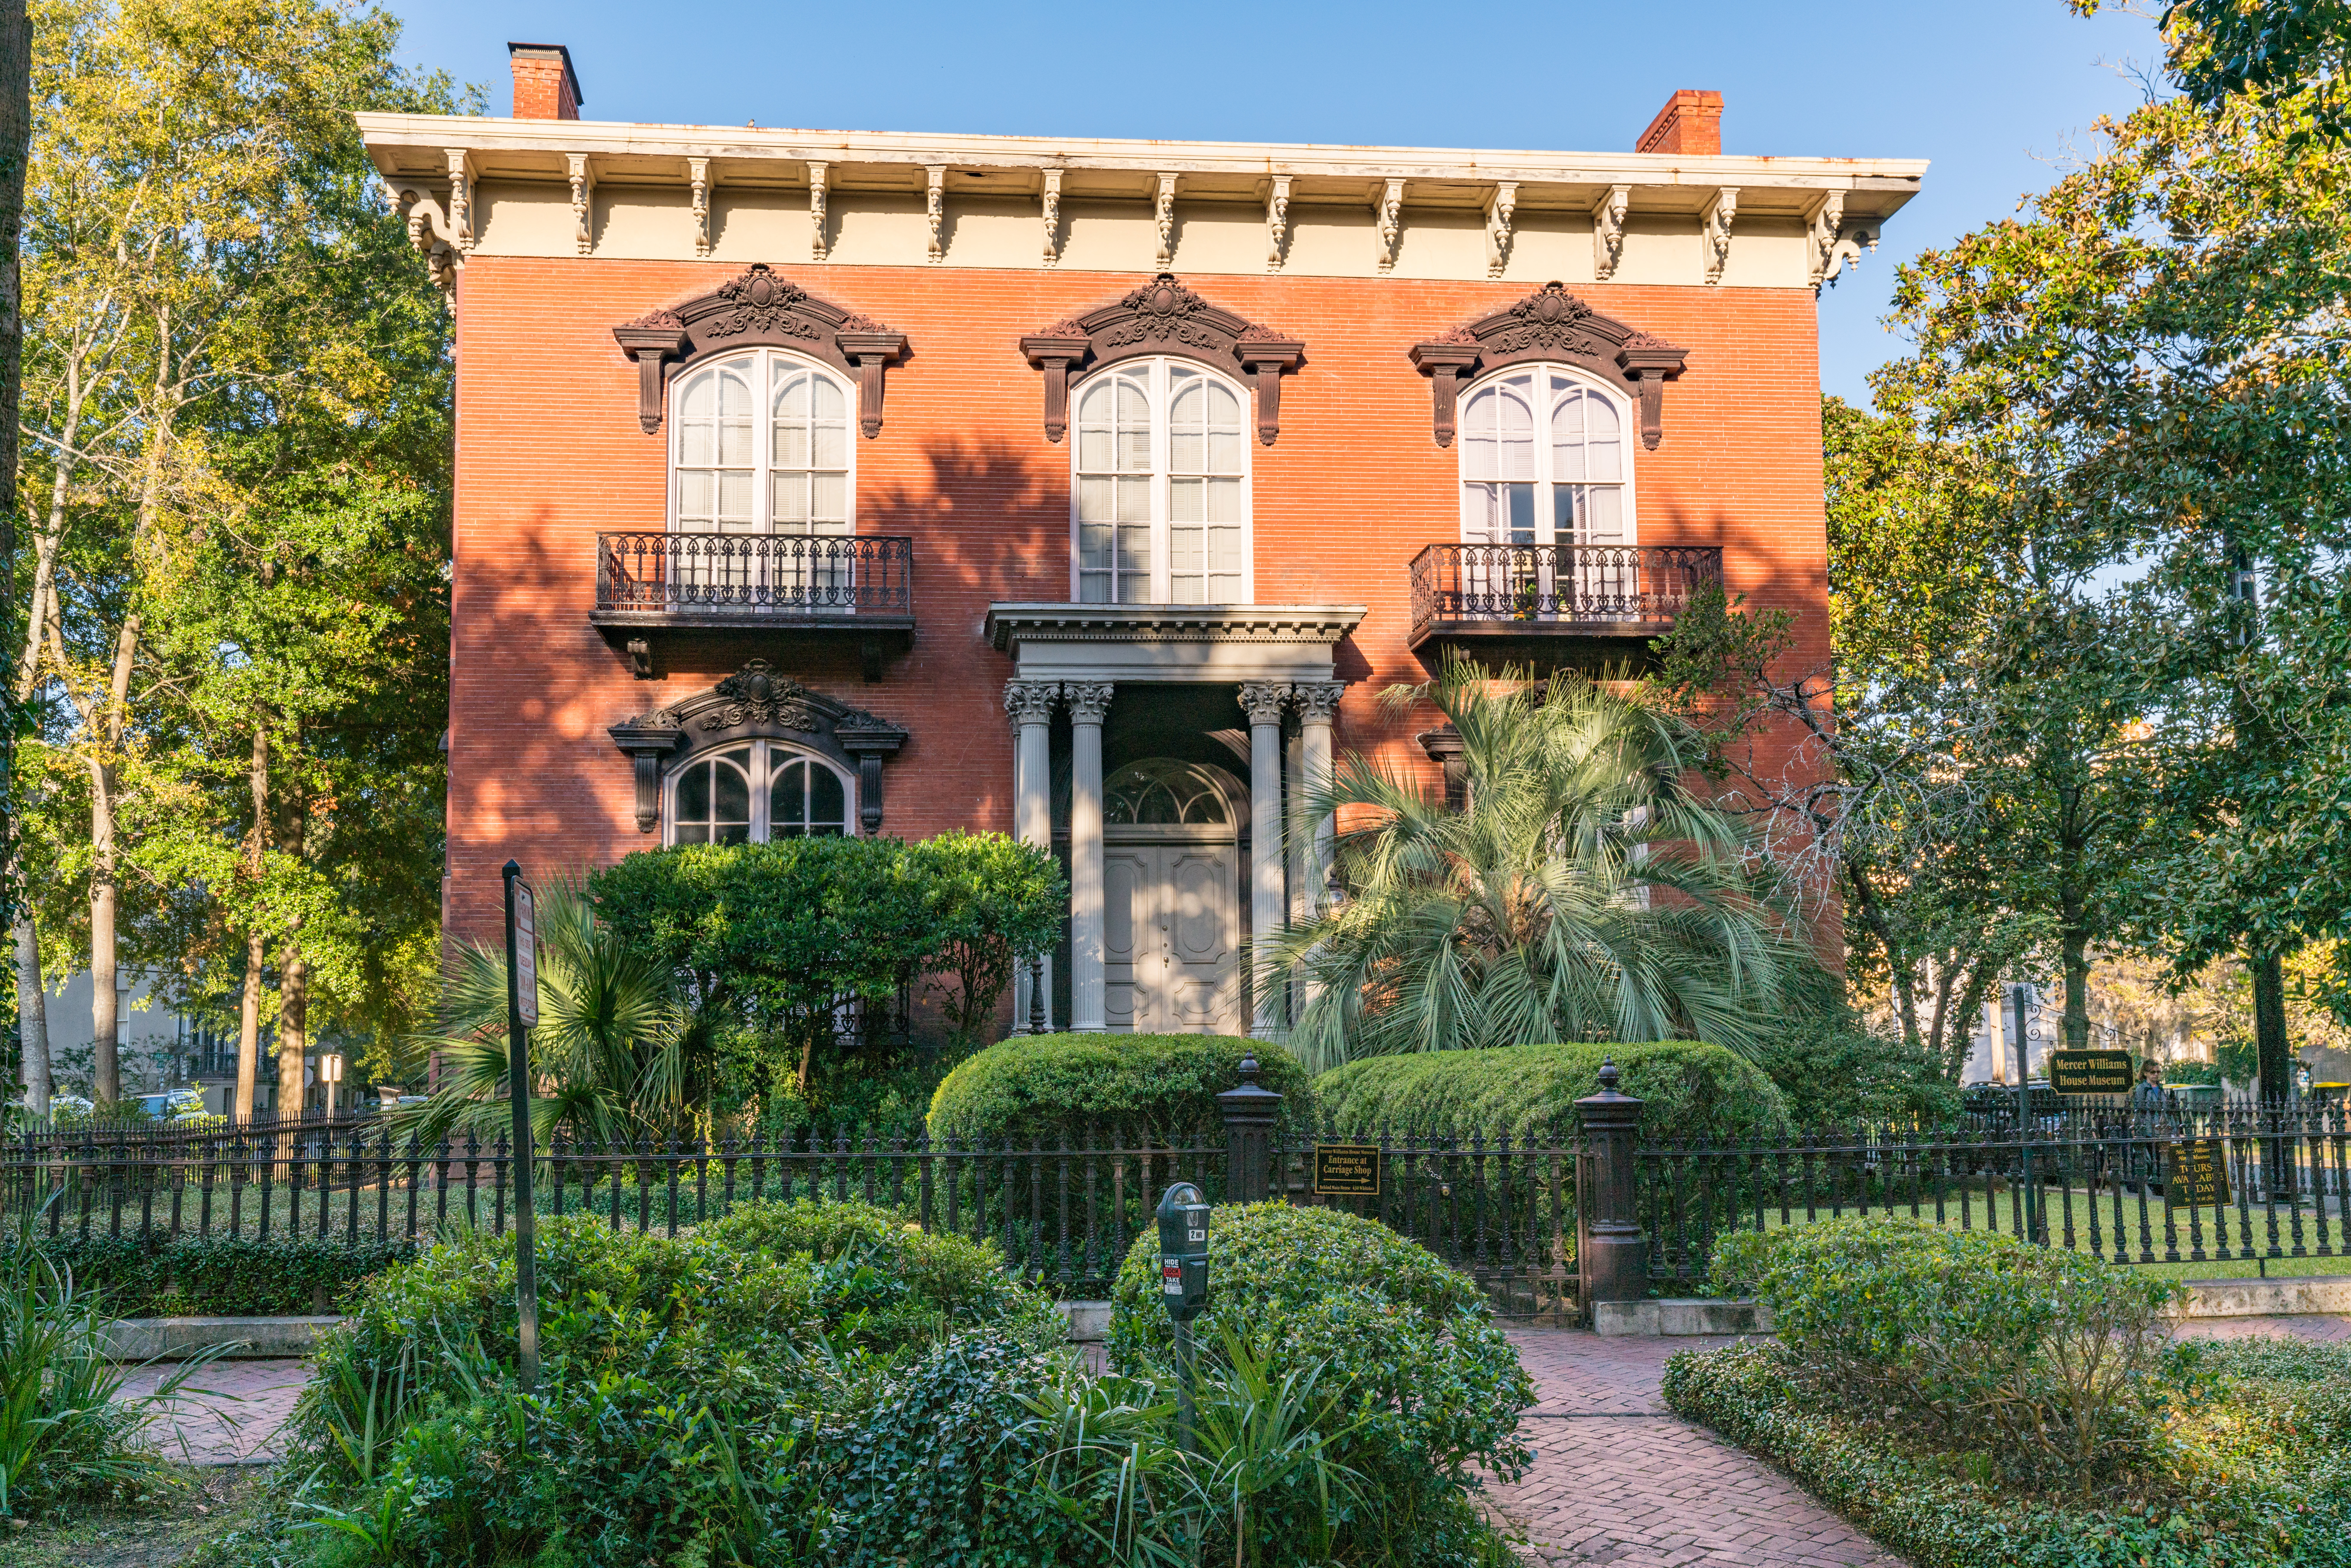 Plan an Amazing Family Vacation with These Best Things to Do in Savannah - Mercer-Williams House